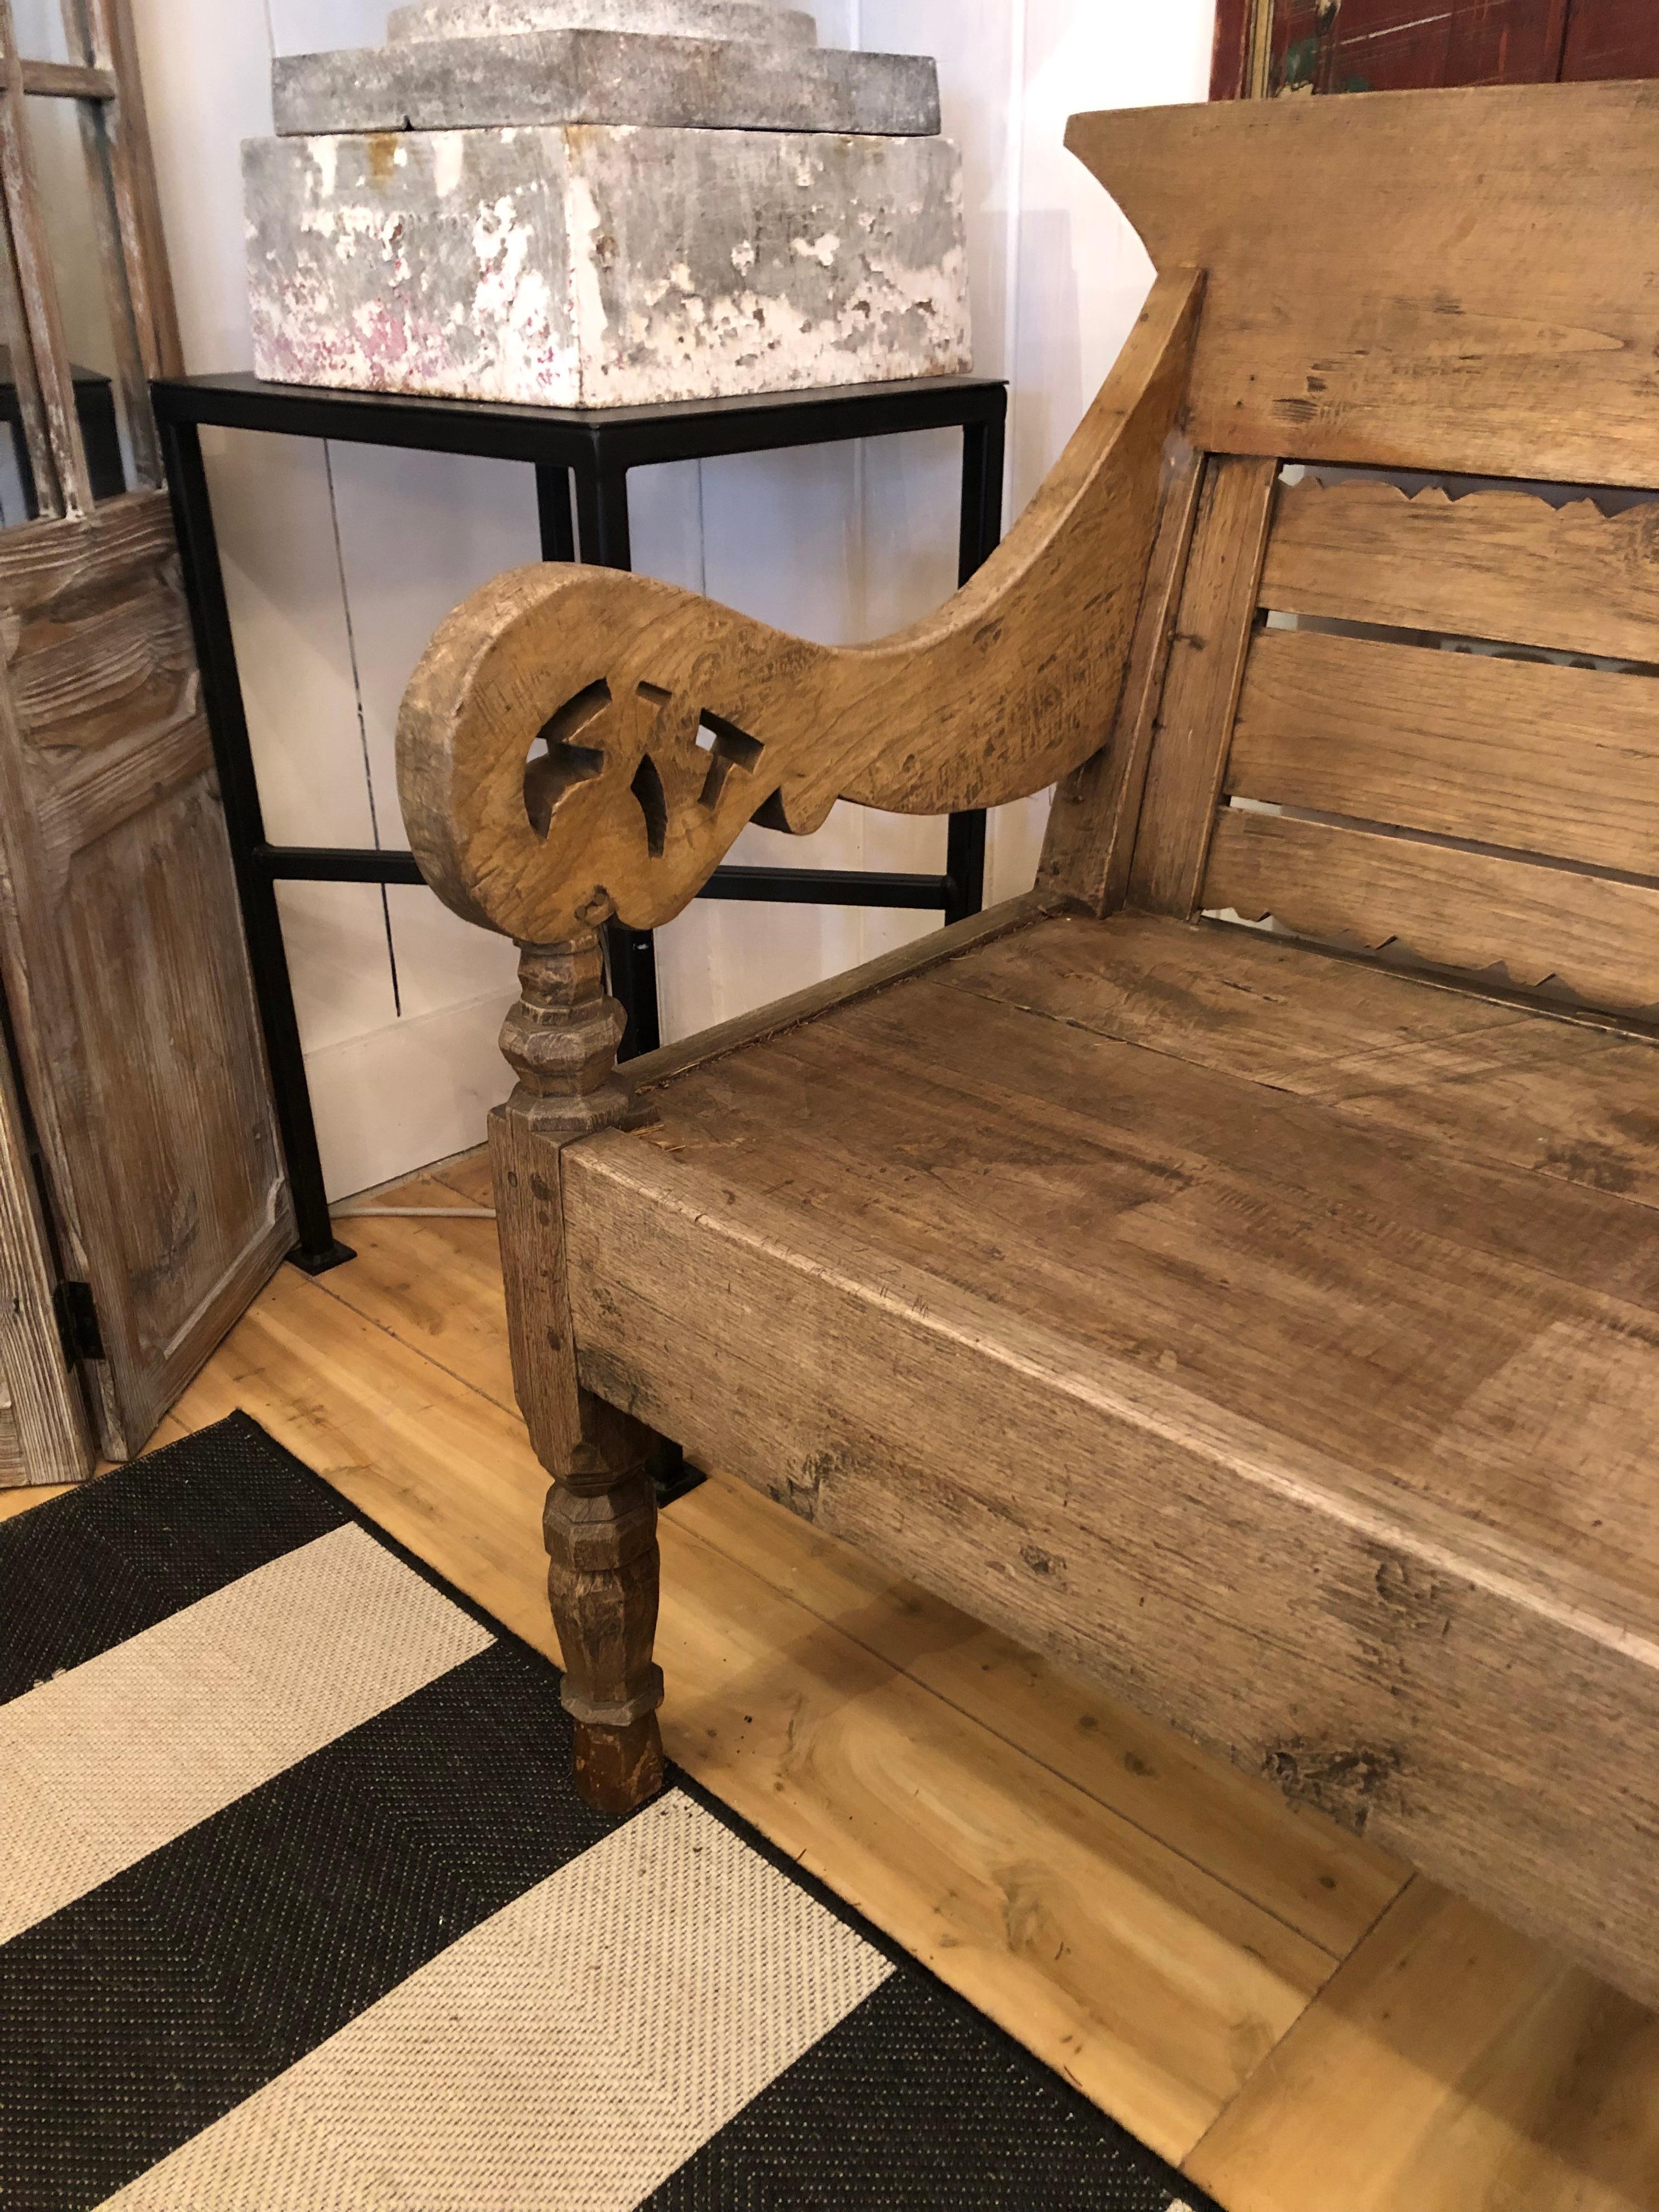 Impressive in scale carved rustic teak bench having slatted back, gorgeous curvy scrolled arms and turned legs.  Sourced in Jakarta.  Warm and character rich patina.
72.75 width arm to arm
arm height 30.5